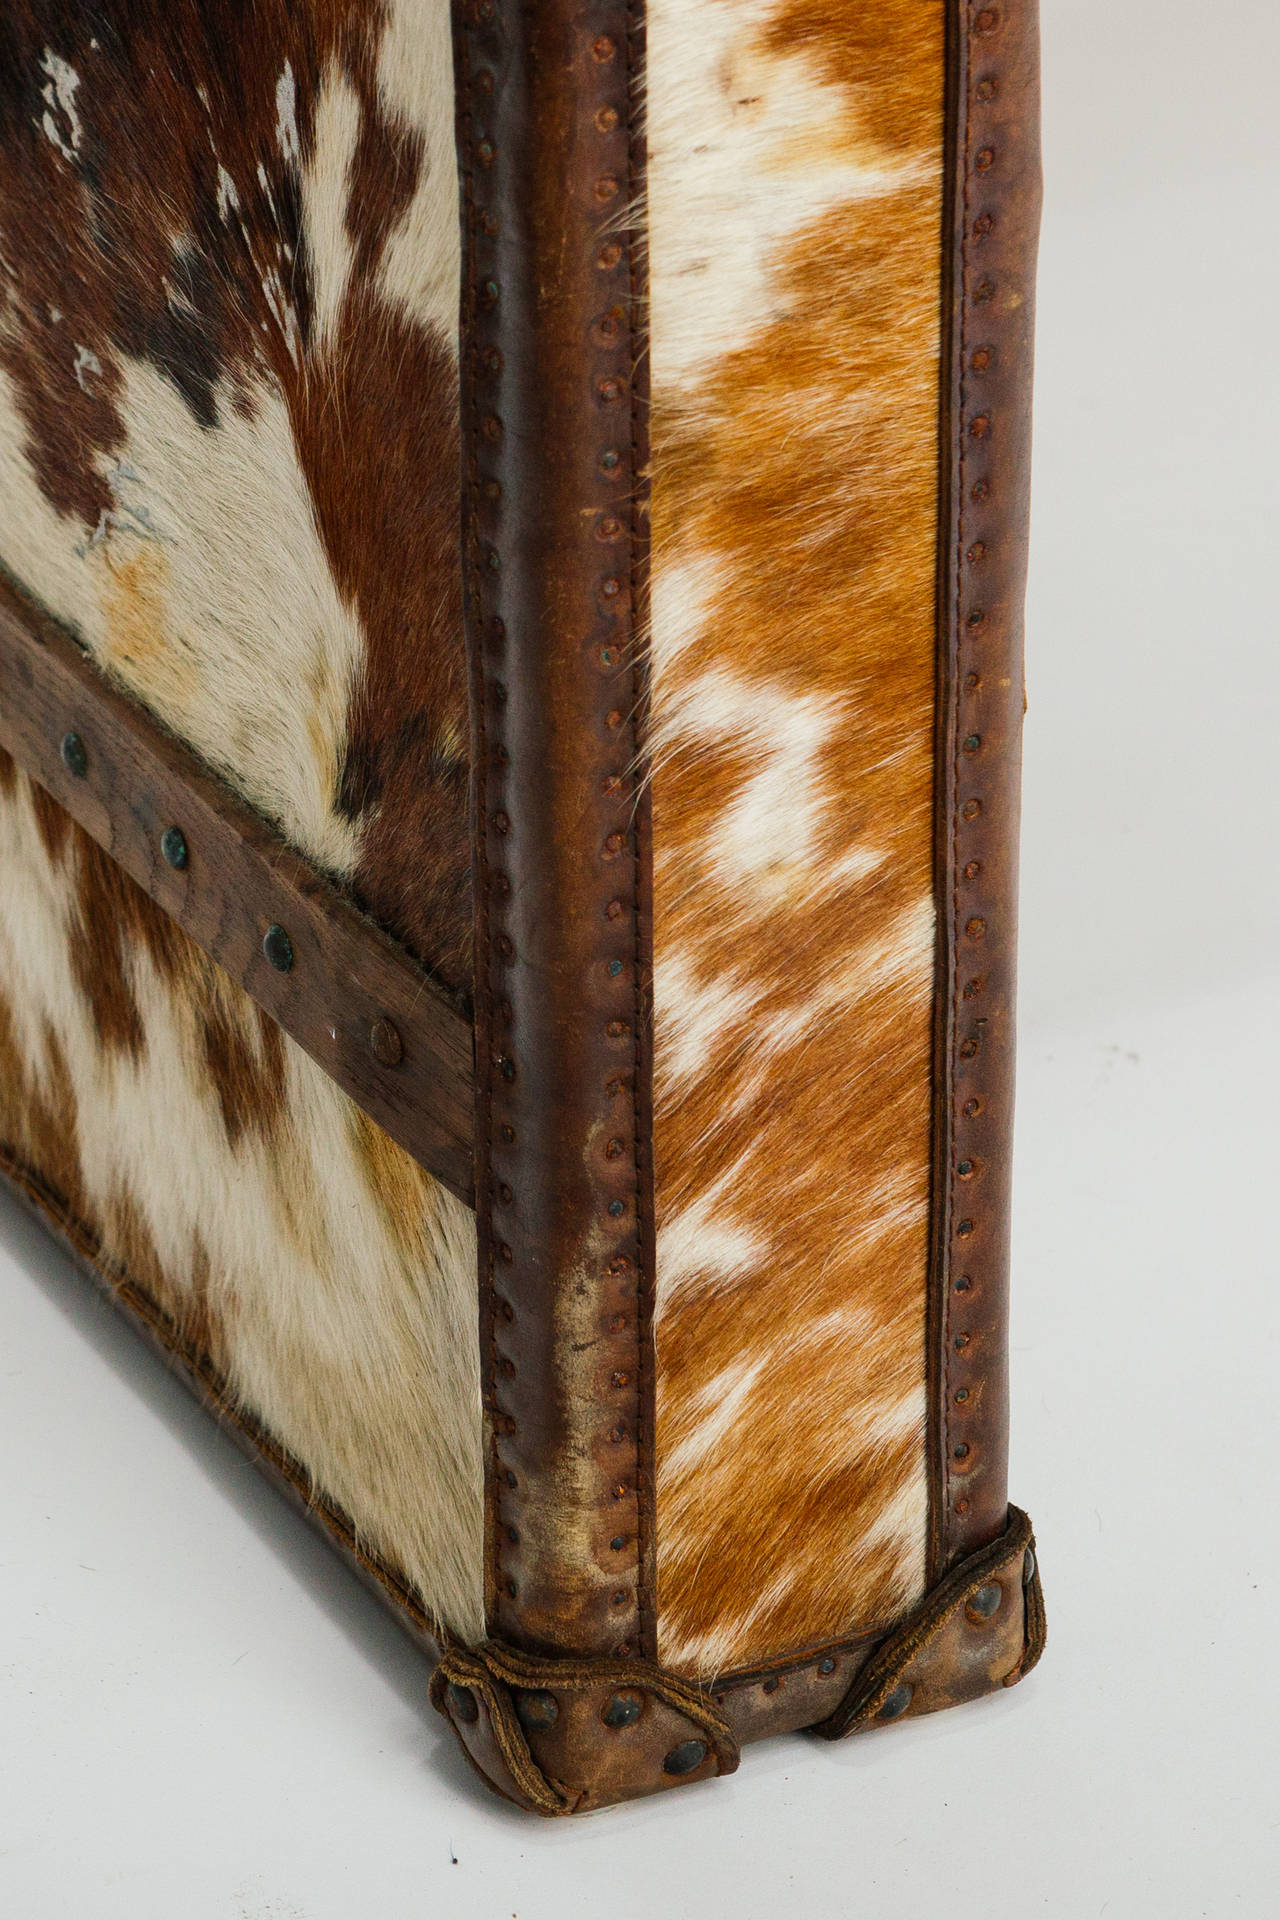 Rare cowhide and leather 3 drawer desk by Tequilla Kola, purchased in Hong Kong.